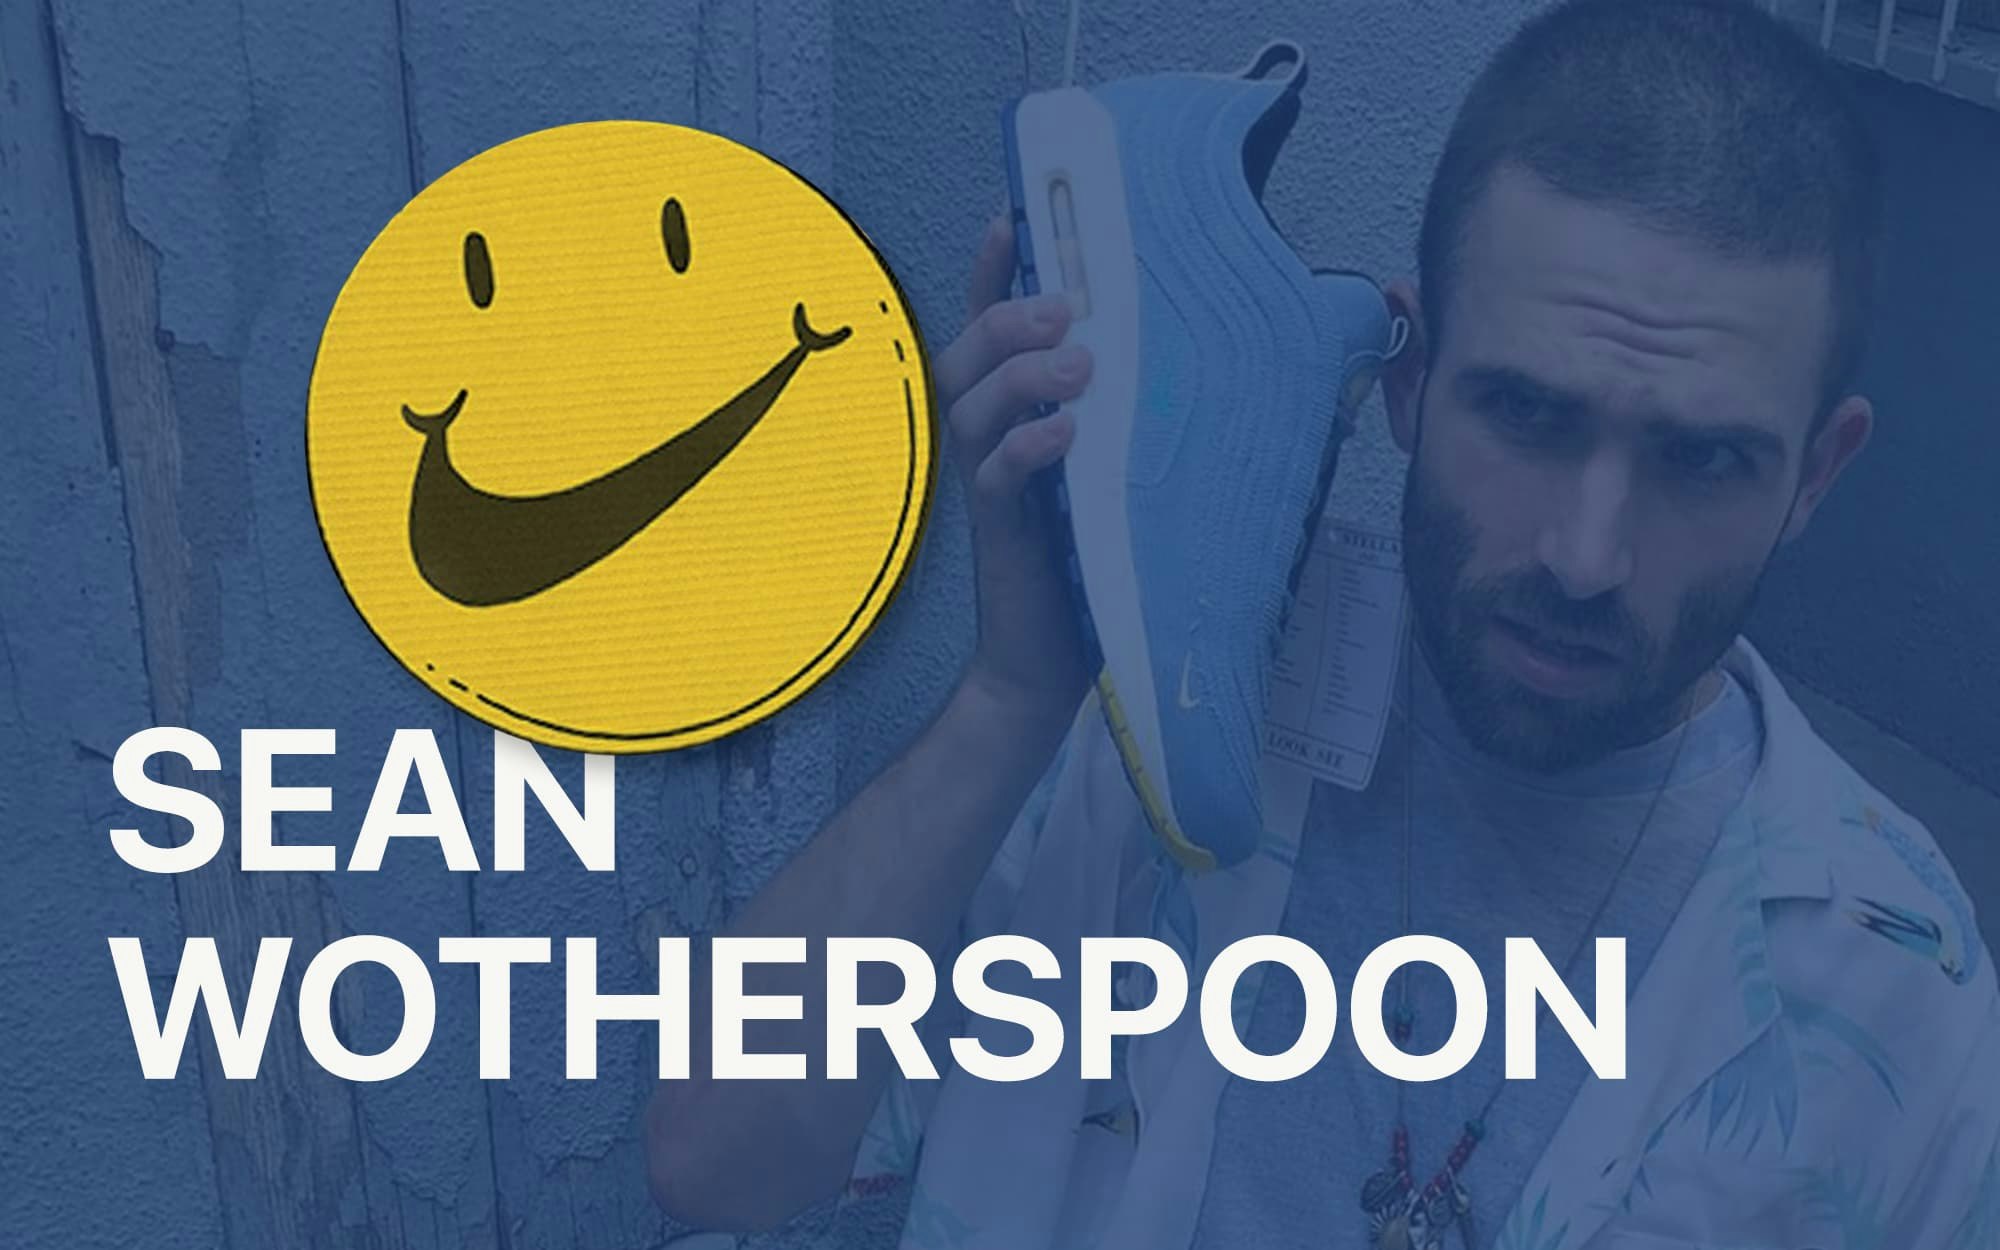 Sean Wotherspoon